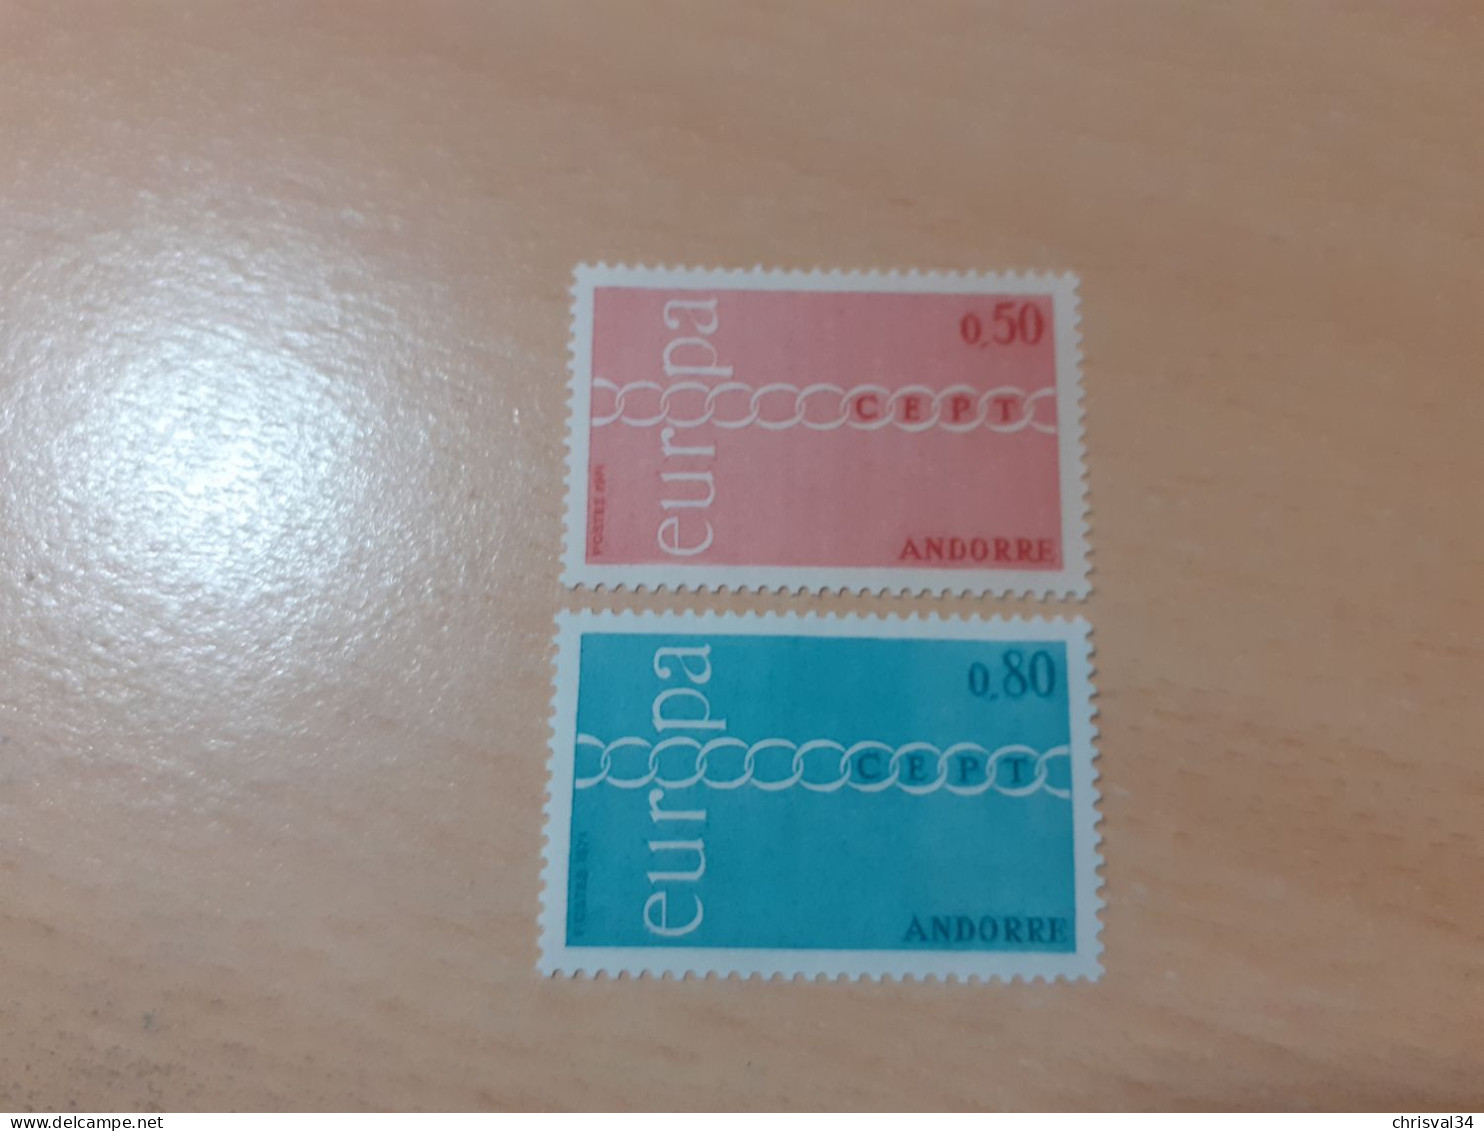 TIMBRES     ANDORRE  FRANCAIS  ANNEE   1971   N  212  /  213   COTE  50,00  EUROS   NEUFS  LUXE** - Nuovi